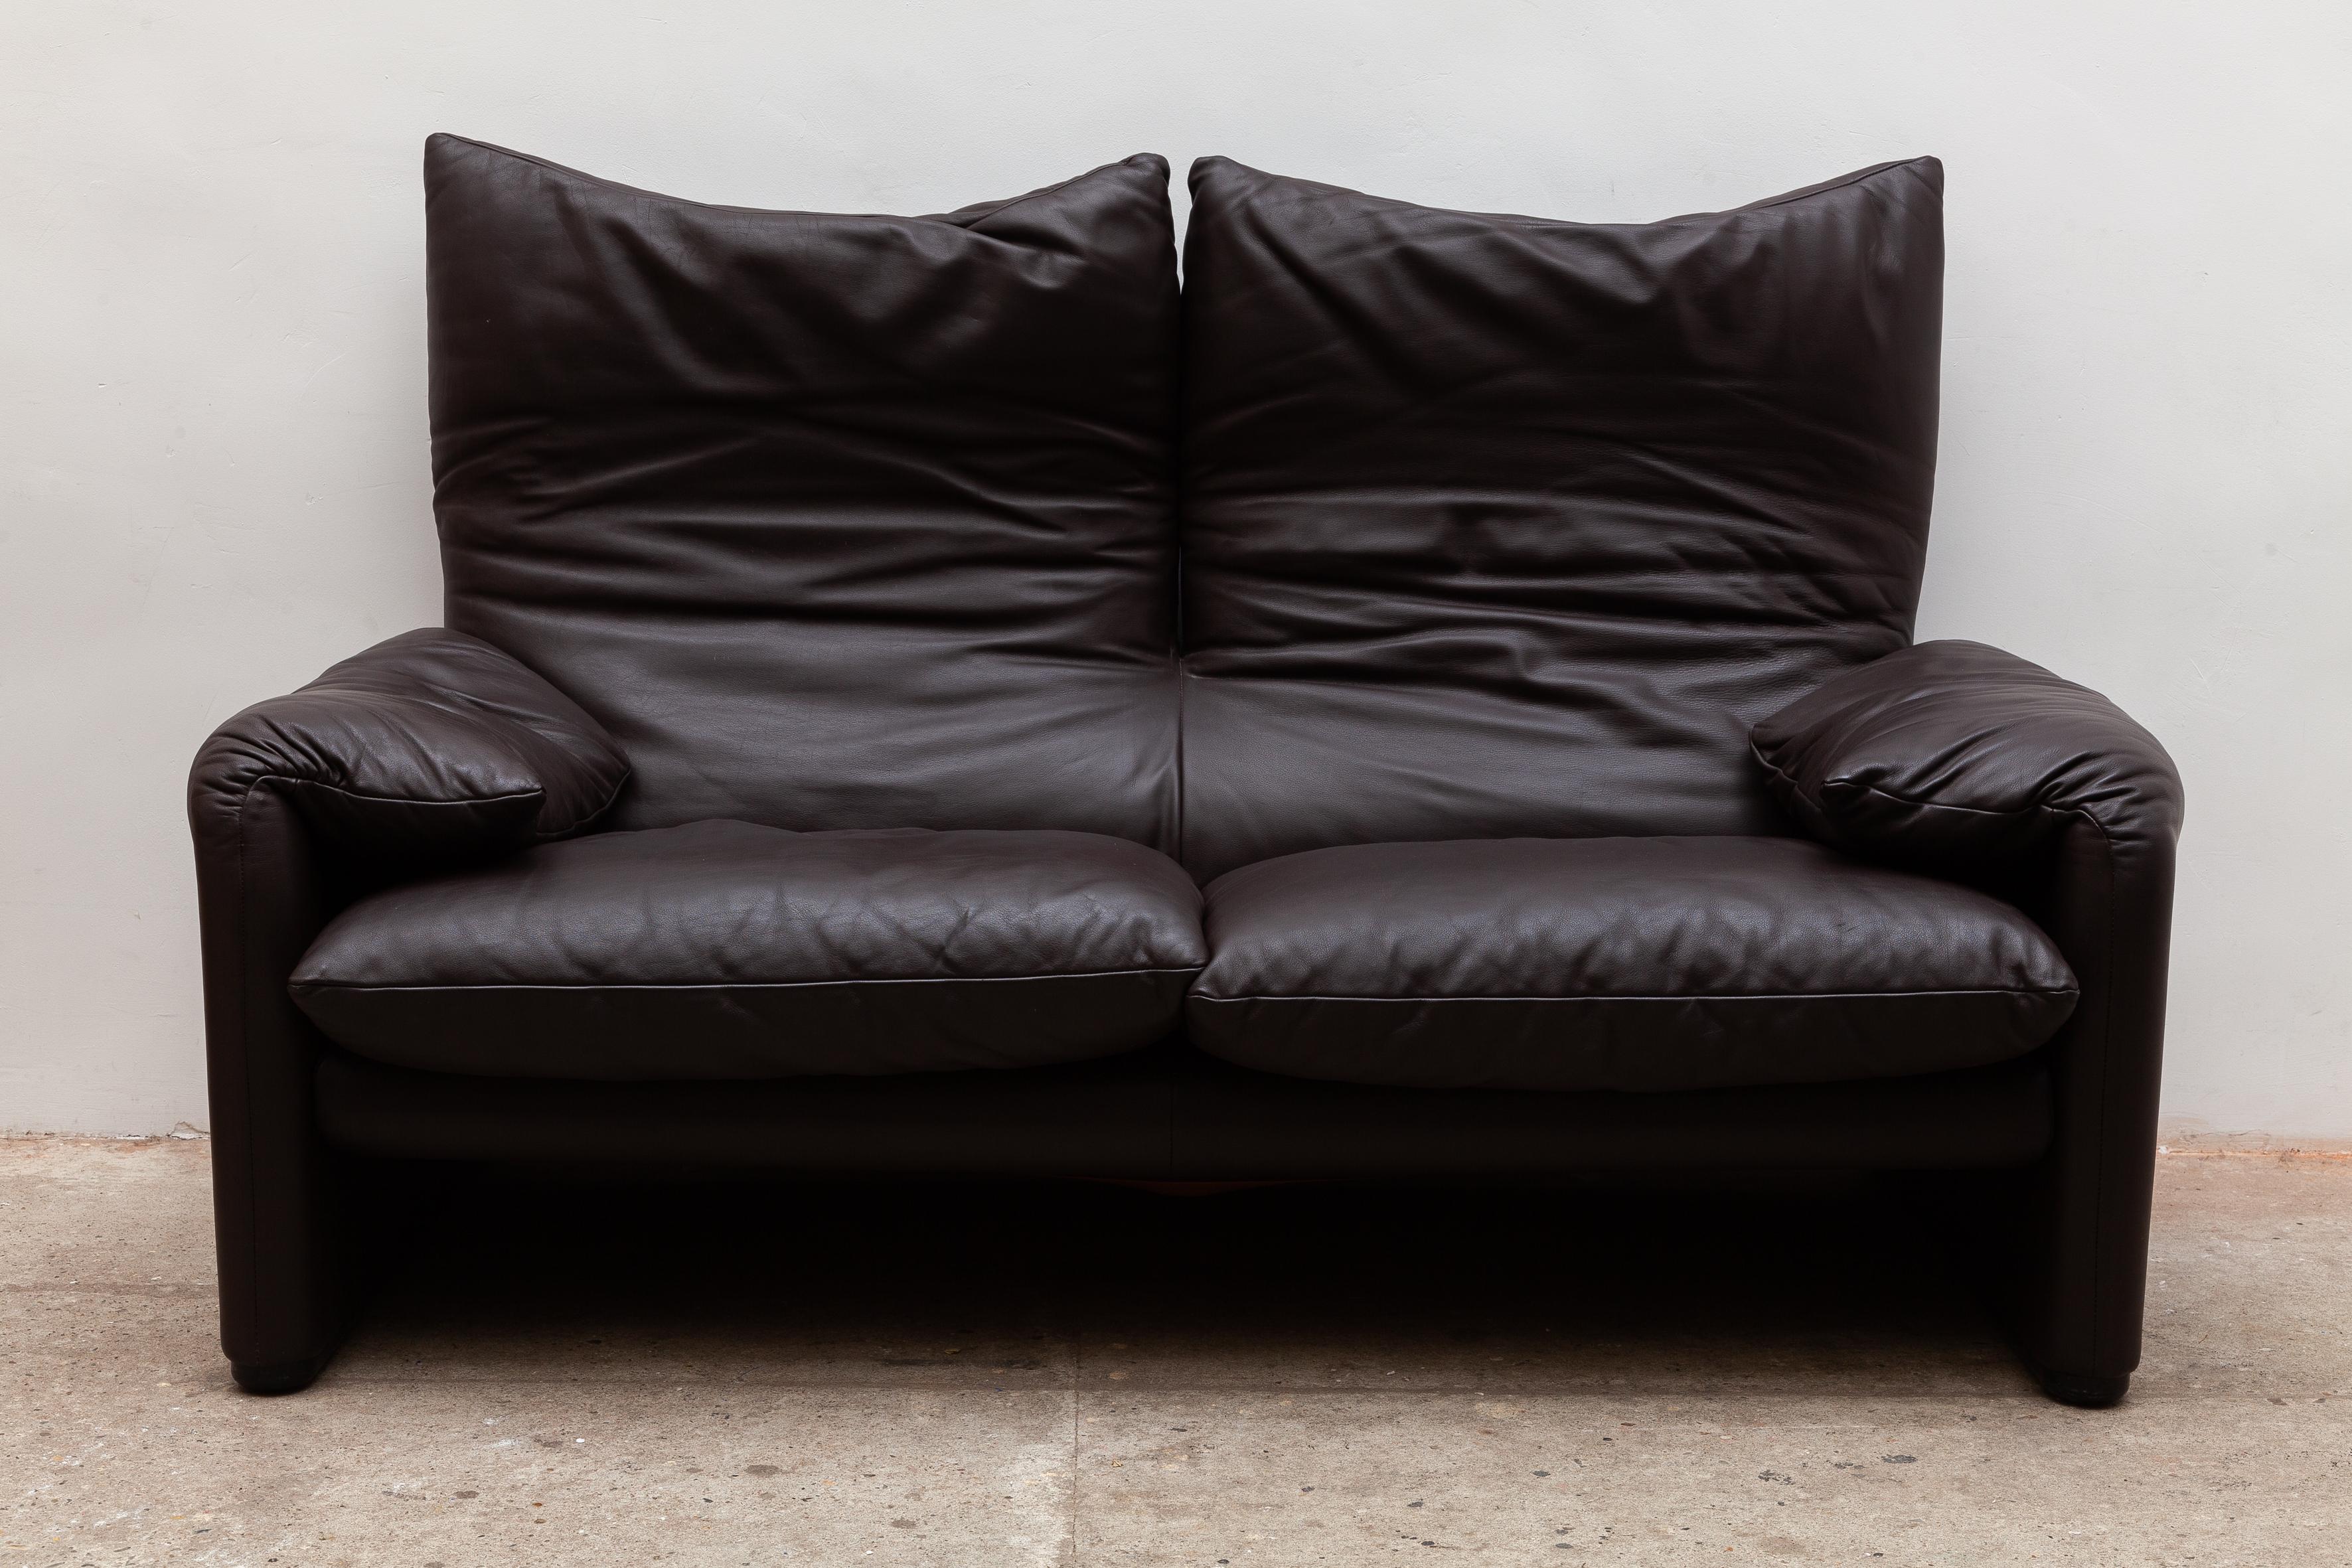 Two seat sofa “Maralunga”designed by Vico Magistretti for Cassina, Italy. Chocolate brown leather in excellent condition. This avant-garde mechanism, patented by Cassina, makes the back cushion unfold and move upwards, to form a head-rest.